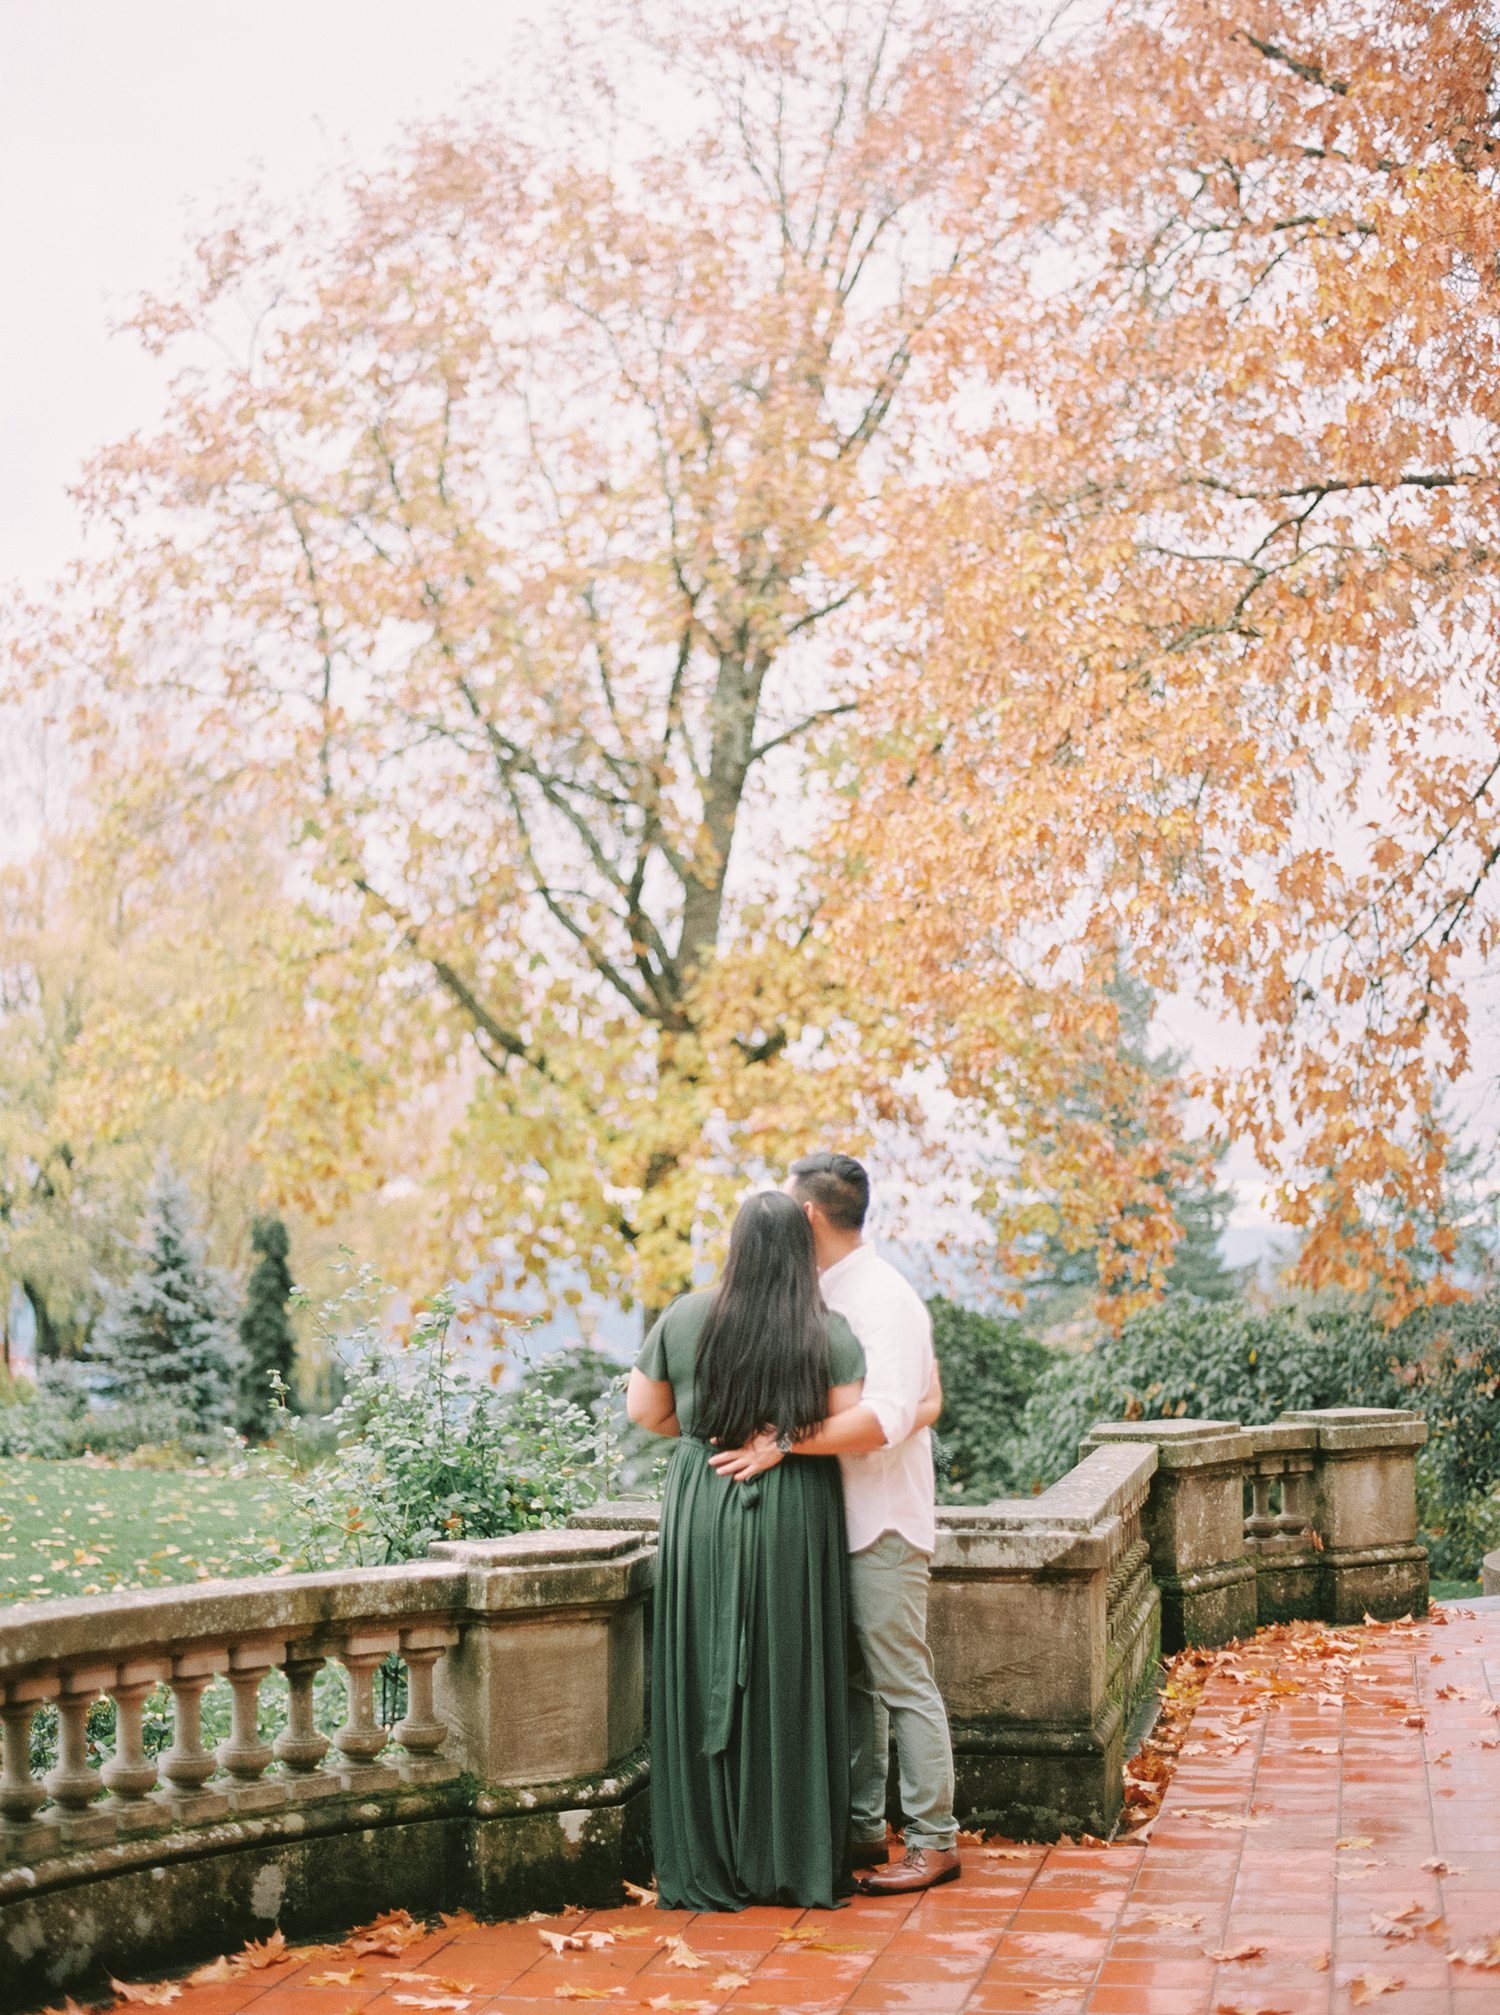 autumn colors surrounding an engaged couple